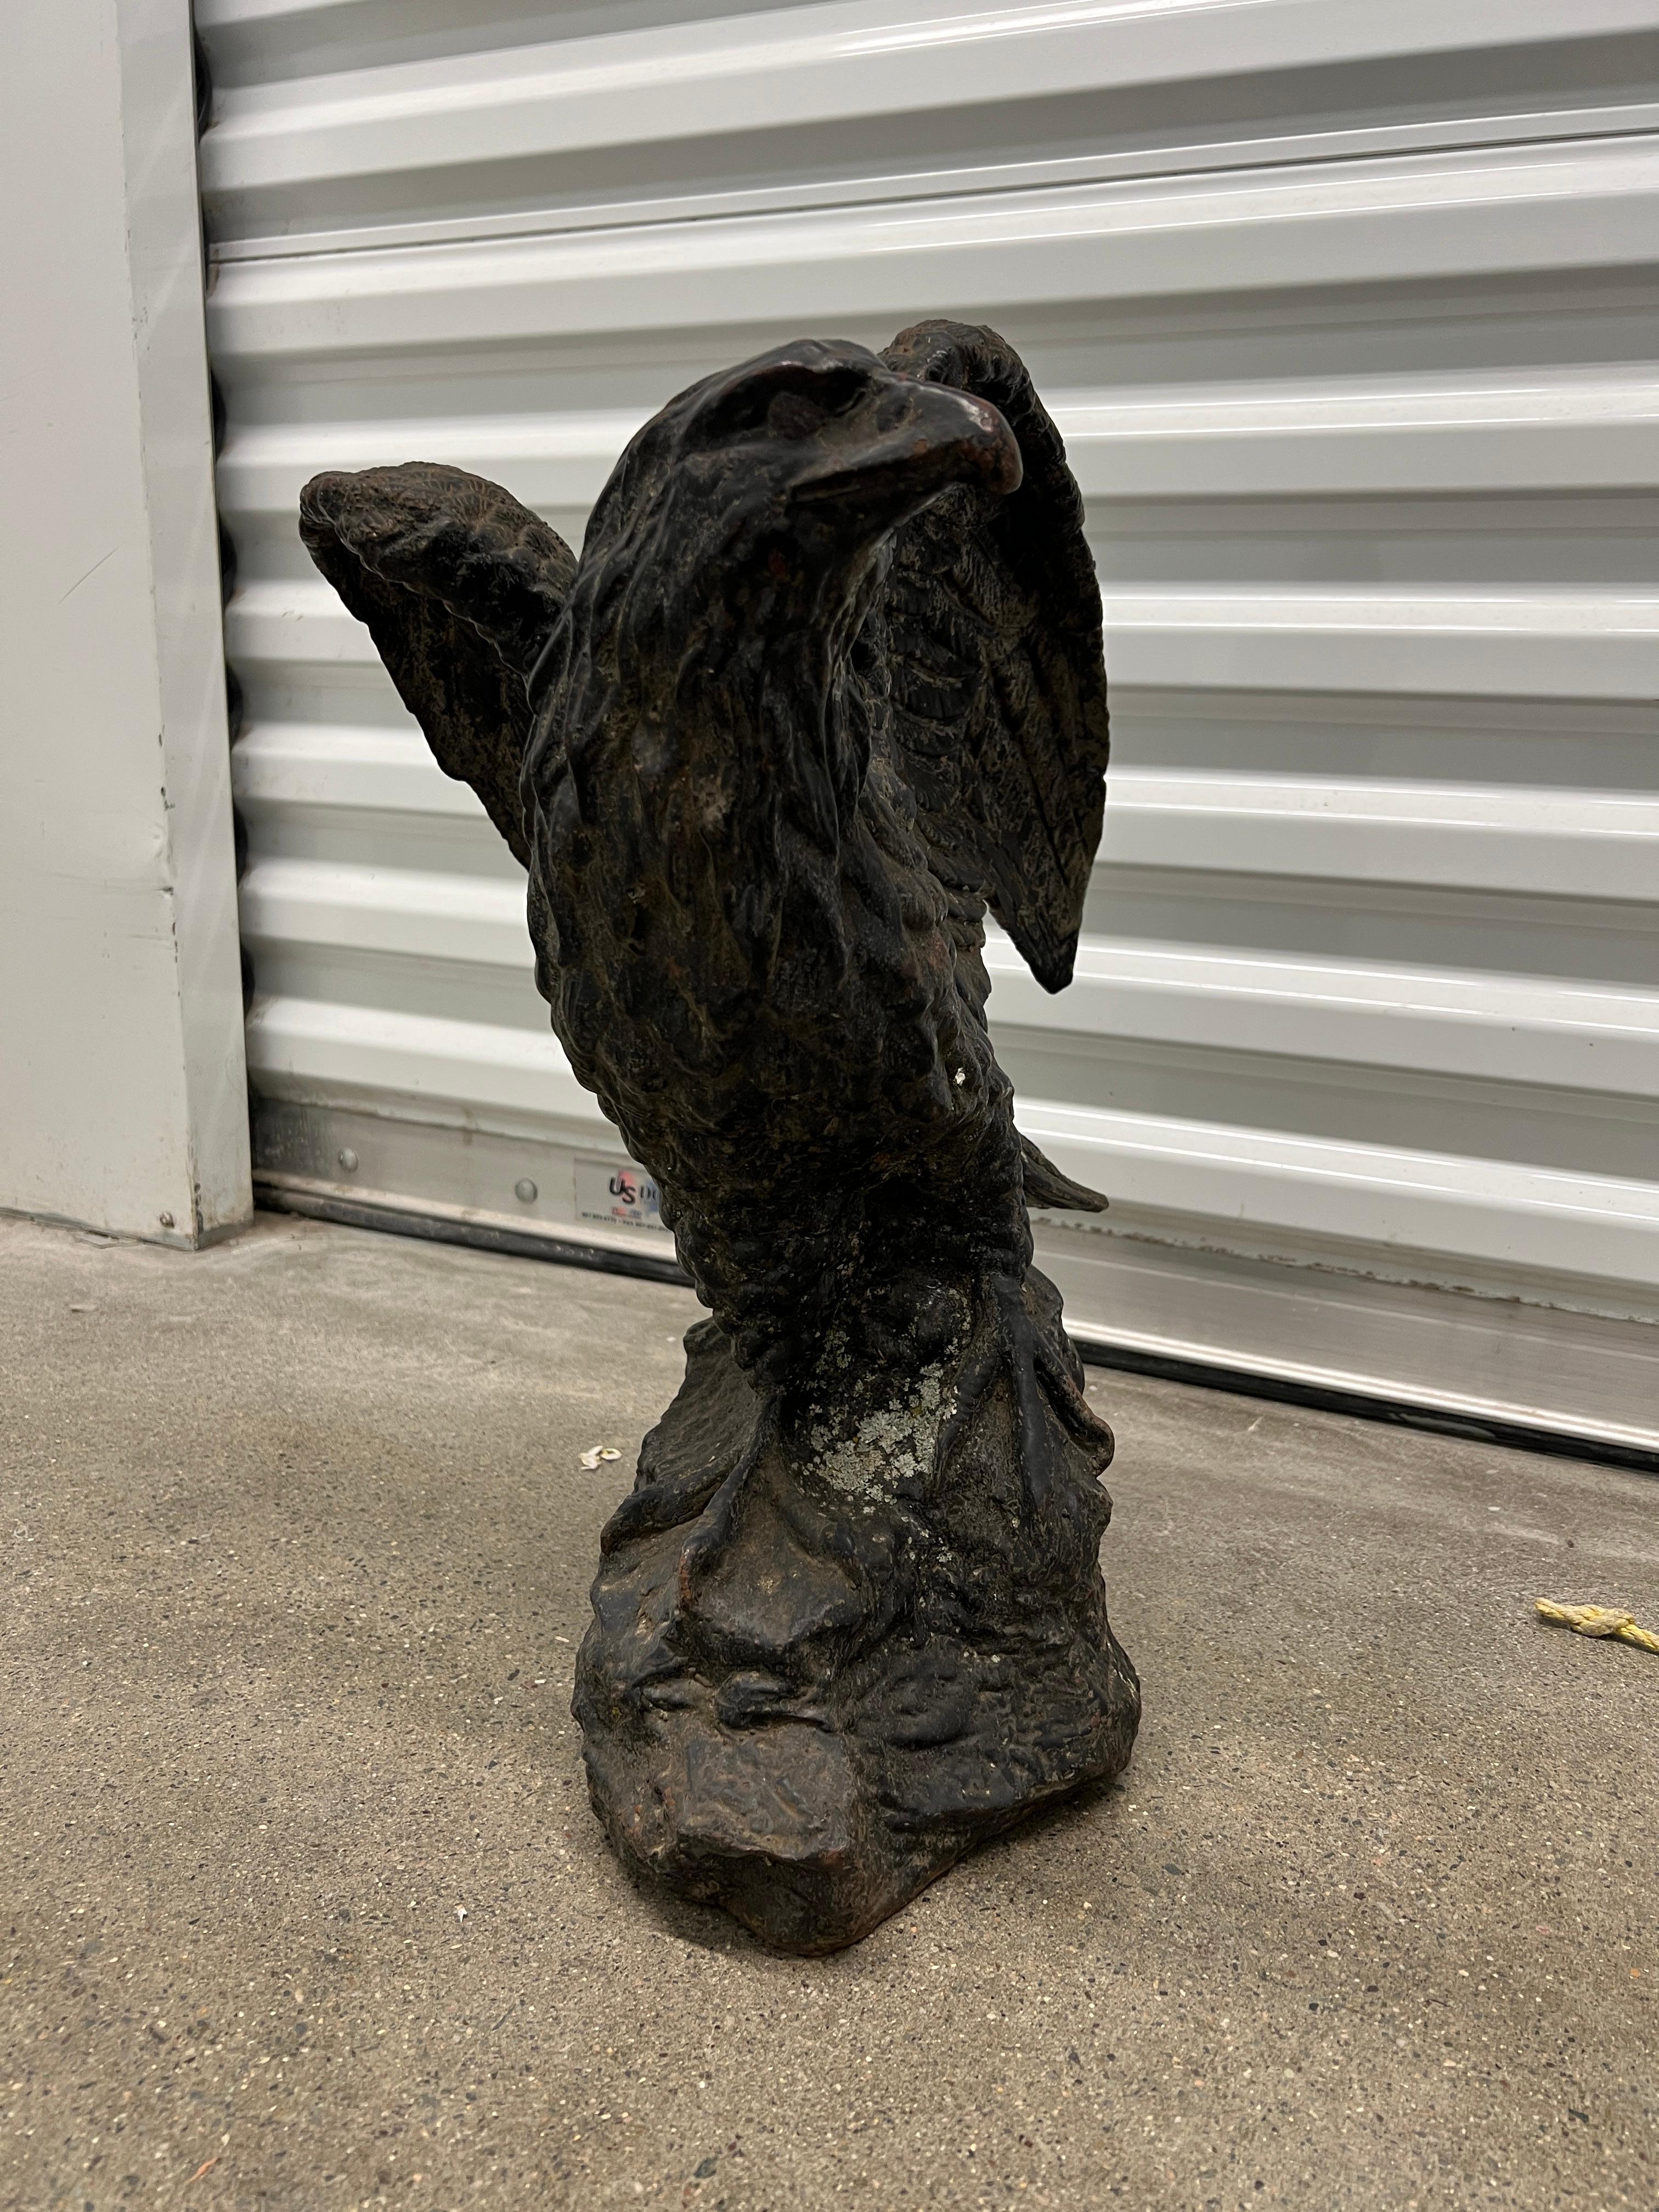 American, 19th century.

An unusual cast iron pilot house eagle circa 1880. 

In the 19th and early 20th century it was common to find eagle carvings on American steamboat pilot houses. Each of the eagles were typically unique to the division of